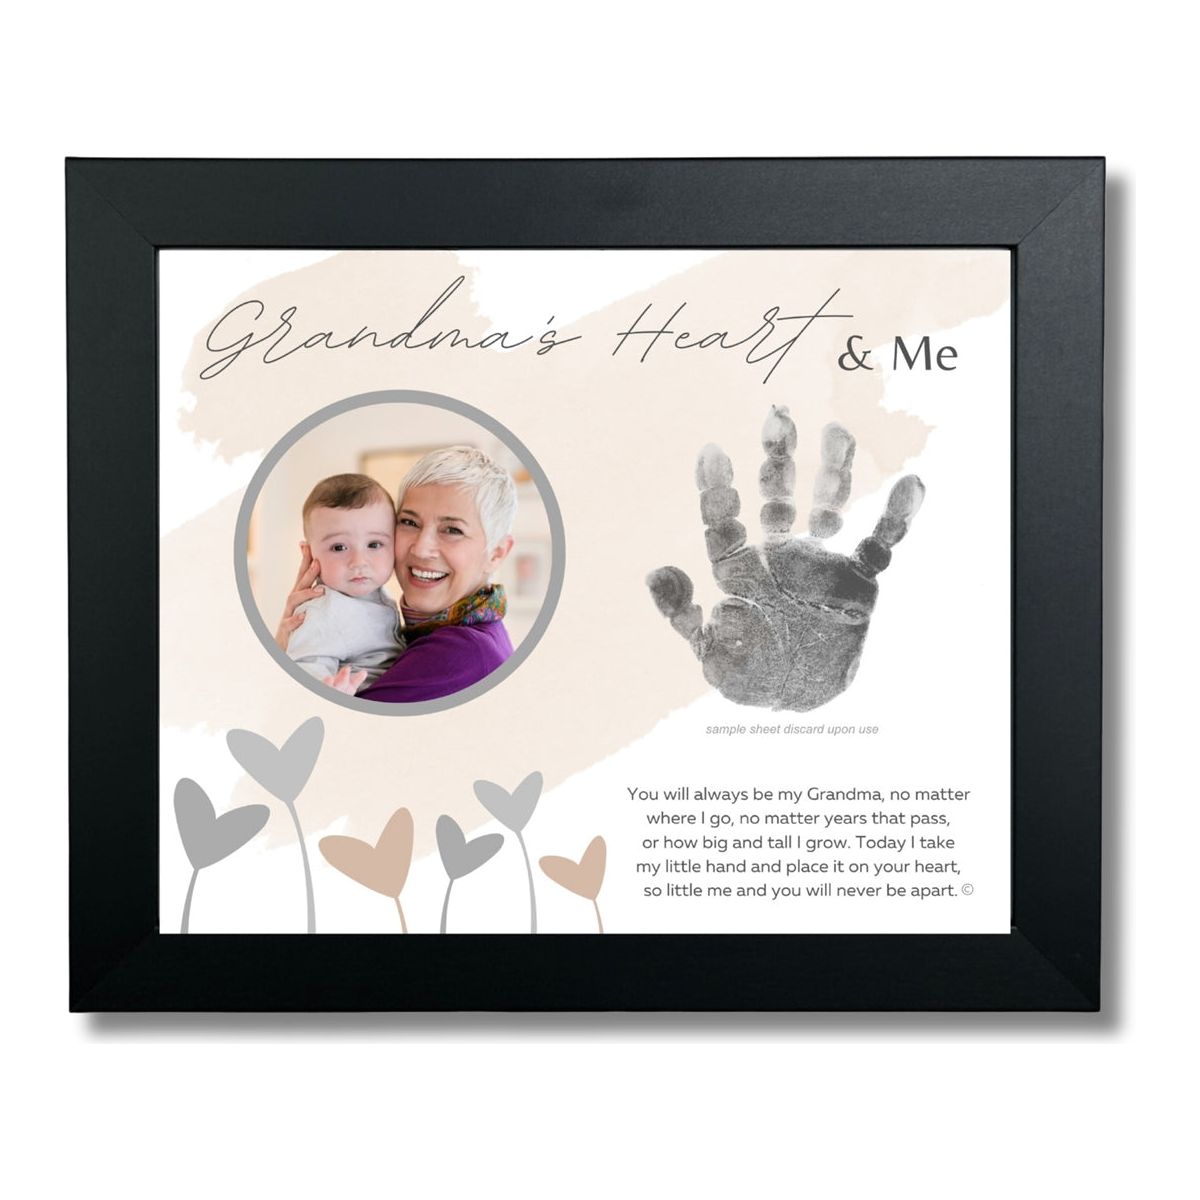 8x10 black frame with &quot;Grandma&#39;s Heart &amp; Me&quot; artwork with poem, space for a handprint, and a circular opening for a photograph.